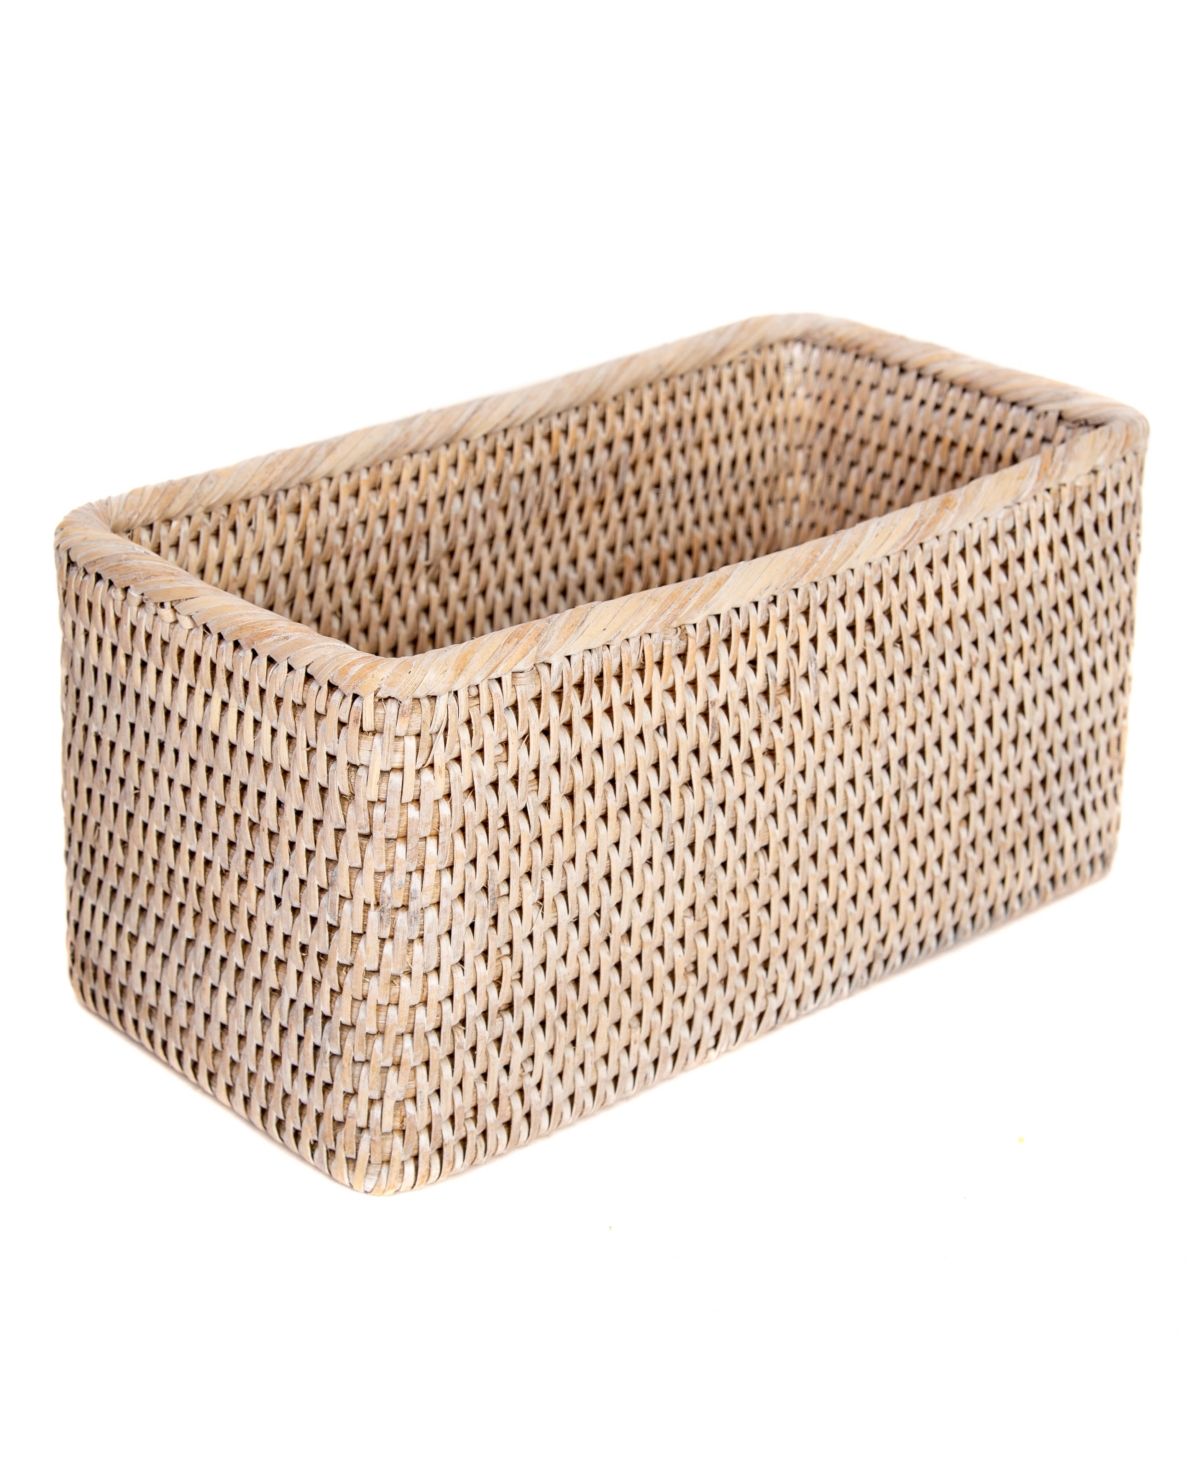 Artifacts Trading Company Artifacts Rattan Rectangular Basket In Off-white